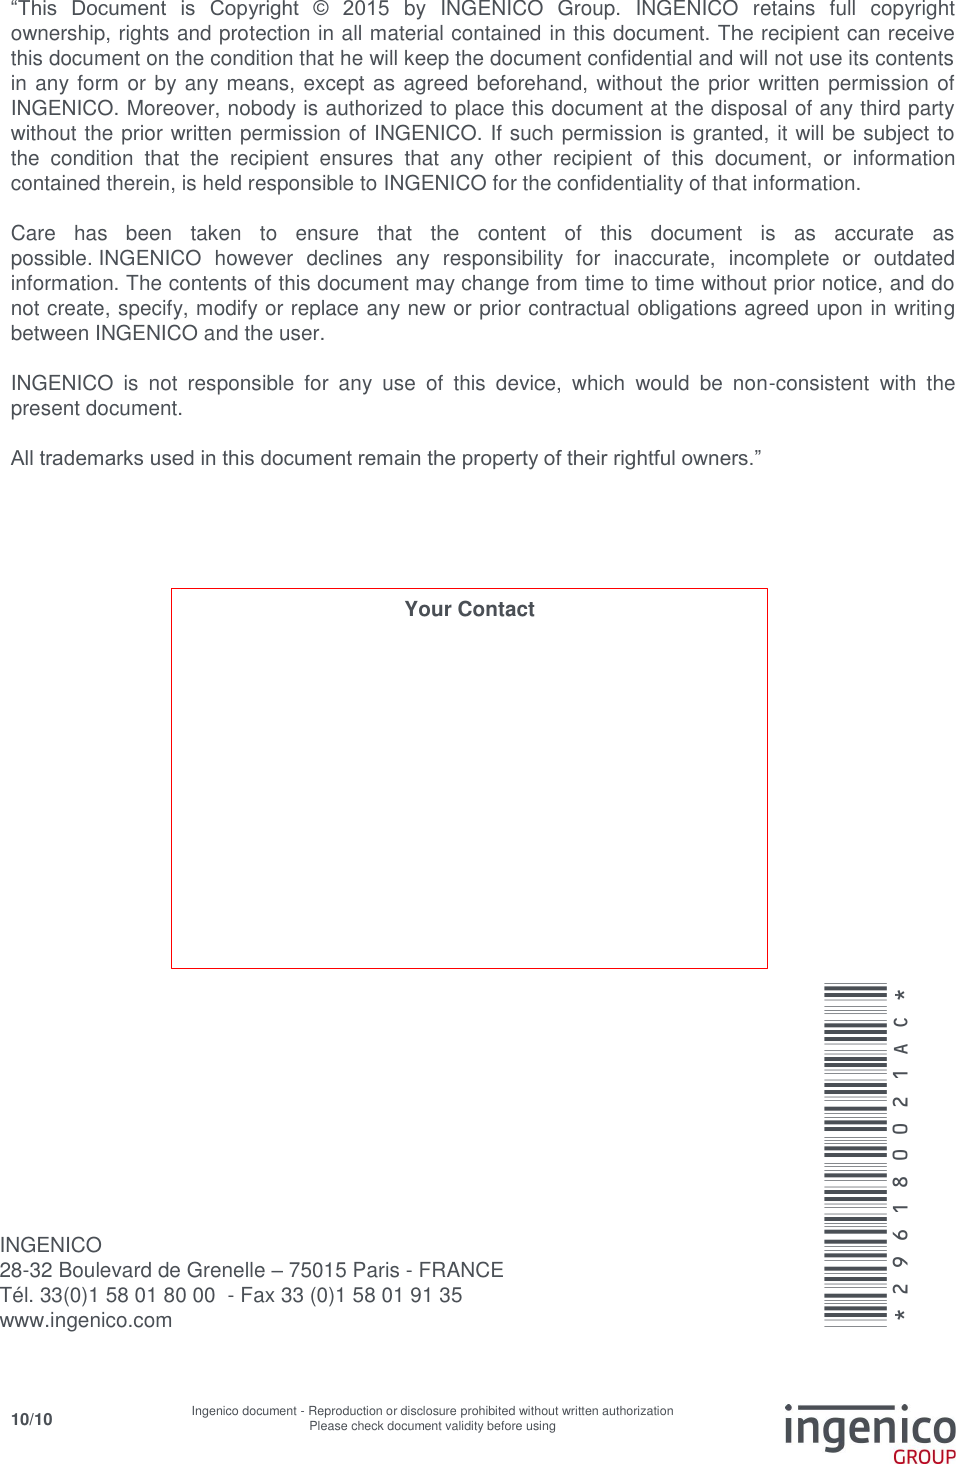     10/10 Ingenico document - Reproduction or disclosure prohibited without written authorization Please check document validity before using     “This  Document  is  Copyright  ©  2015  by  INGENICO  Group.  INGENICO  retains  full  copyright ownership, rights and protection in all material contained in this document. The recipient can receive this document on the condition that he will keep the document confidential and will not use its contents in any form or by any means, except as agreed beforehand,  without the prior written permission of INGENICO. Moreover, nobody is authorized to place this document at the disposal of any third party without the prior written permission of INGENICO. If such permission is granted, it will be subject to the  condition  that  the  recipient  ensures  that  any  other  recipient  of  this  document,  or  information contained therein, is held responsible to INGENICO for the confidentiality of that information.   Care  has  been  taken  to  ensure  that  the  content  of  this  document  is  as  accurate  as possible. INGENICO  however  declines  any  responsibility  for  inaccurate,  incomplete  or  outdated information. The contents of this document may change from time to time without prior notice, and do not create, specify, modify or replace any new or prior contractual obligations agreed upon in writing between INGENICO and the user.   INGENICO  is  not  responsible  for  any  use  of  this  device,  which  would  be  non-consistent  with  the present document.  All trademarks used in this document remain the property of their rightful owners.”     INGENICO  28-32 Boulevard de Grenelle – 75015 Paris - FRANCE Tél. 33(0)1 58 01 80 00  - Fax 33 (0)1 58 01 91 35 www.ingenico.com  *296180021AC* Your Contact 